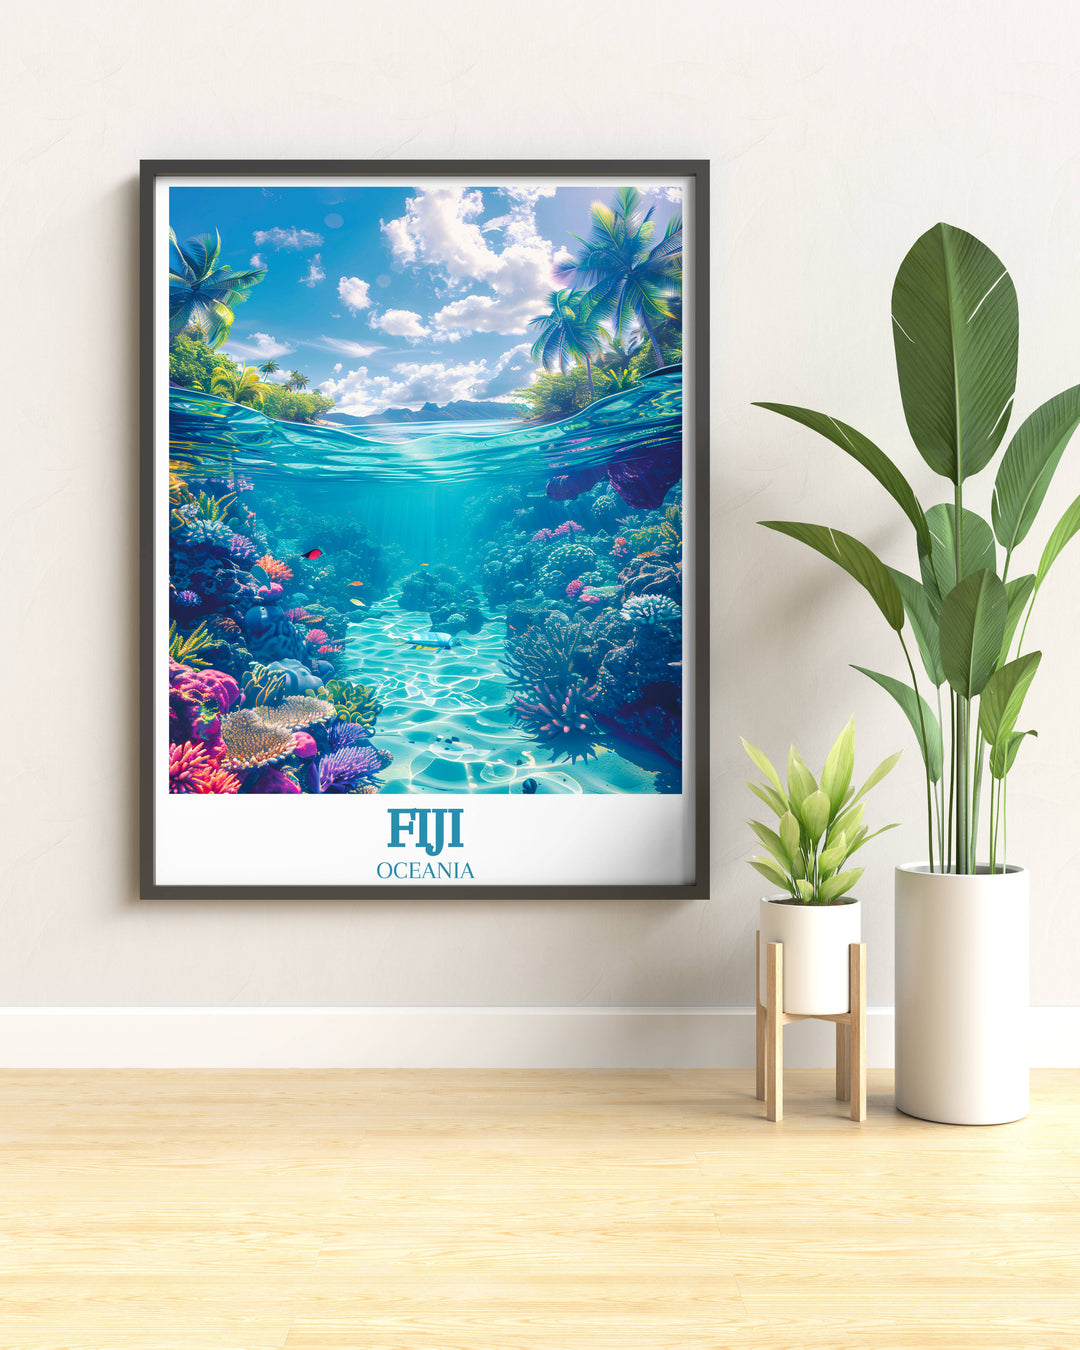 Minimal Travel Print of The Great Astrolabe Reef, offering a sleek and modern depiction of Fiji's natural wonder for contemporary spaces.